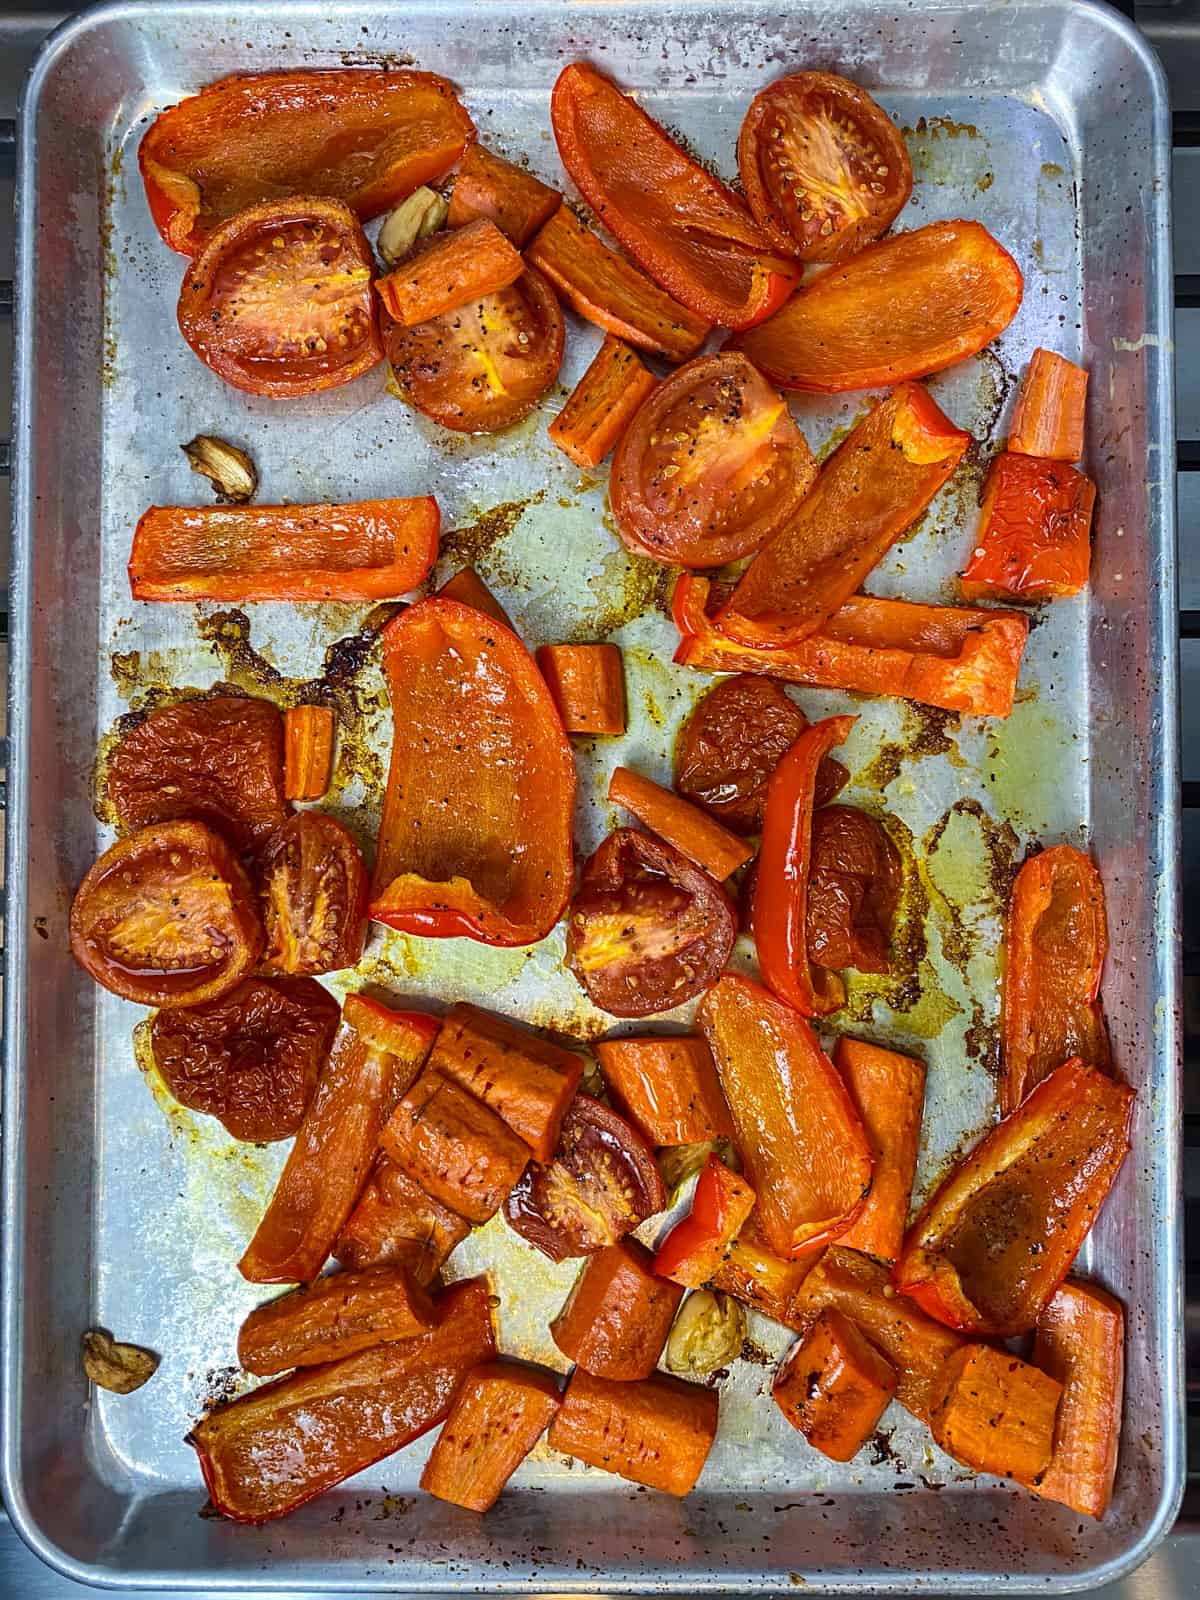 Roast the tomatoes and peppers until tender and cooked through.